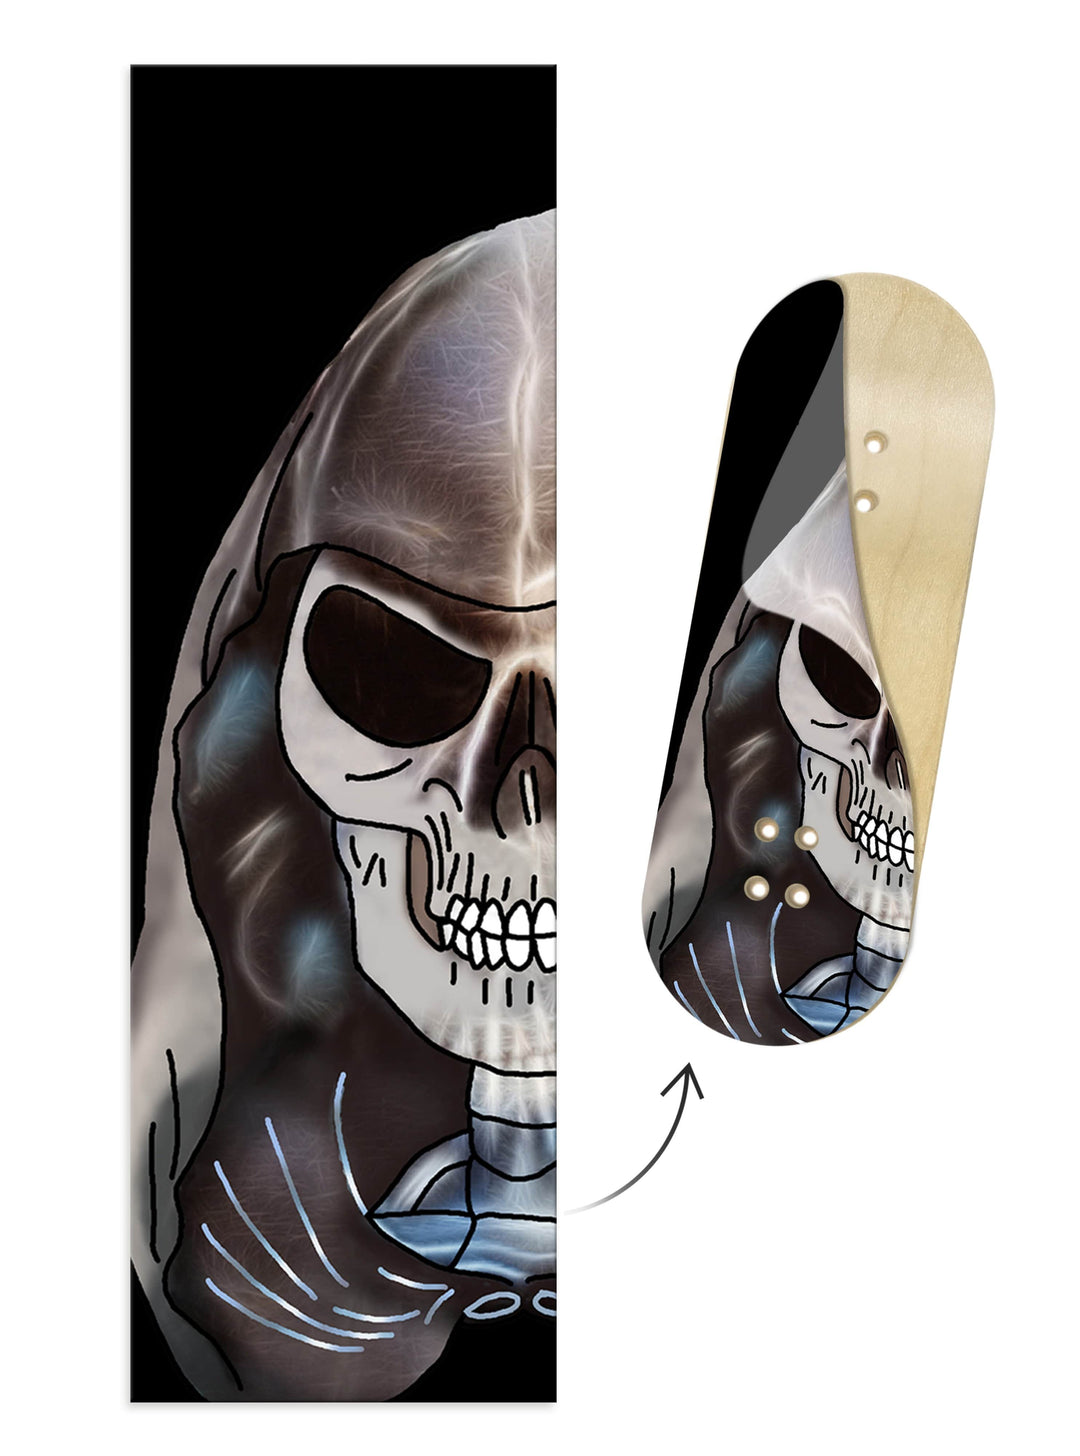 Teak Tuning "Skelly" WellVentions Collaboration Deck Graphic Wrap - Designed by Kuji (age 15) - 35mm x 110mm